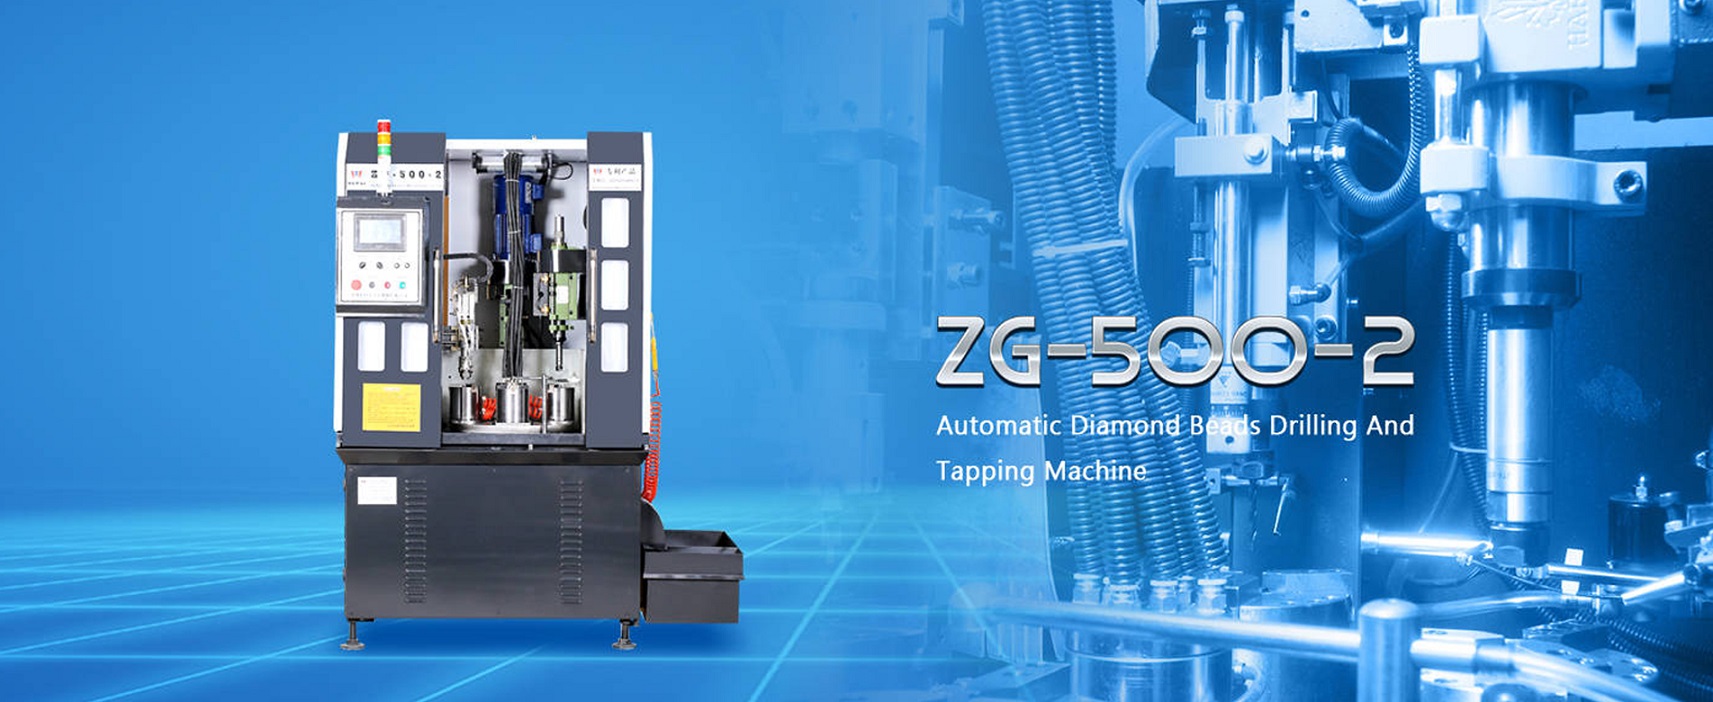 Drilling And Tapping Machine For Diamond WIre Saw Bead